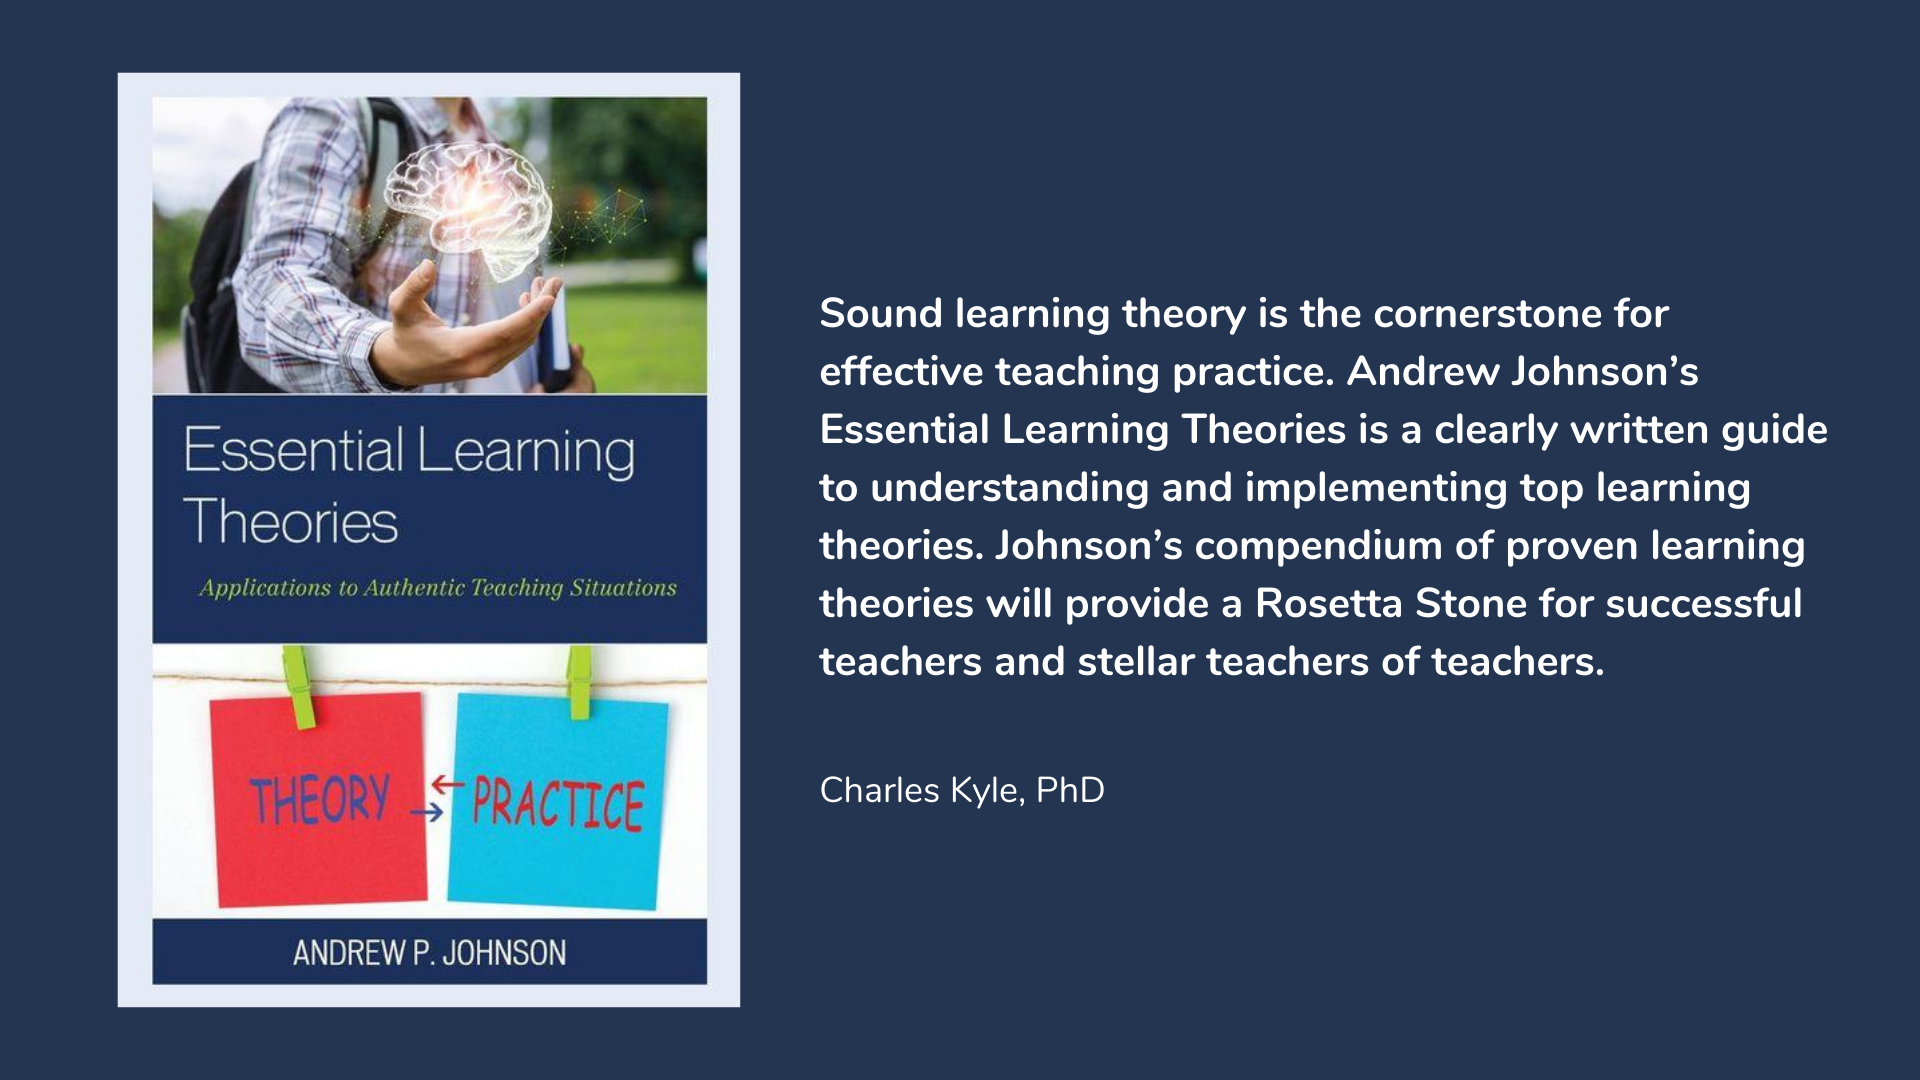 Essential Learning Theories: Applications to Authentic Teaching Situations, book cover and description.